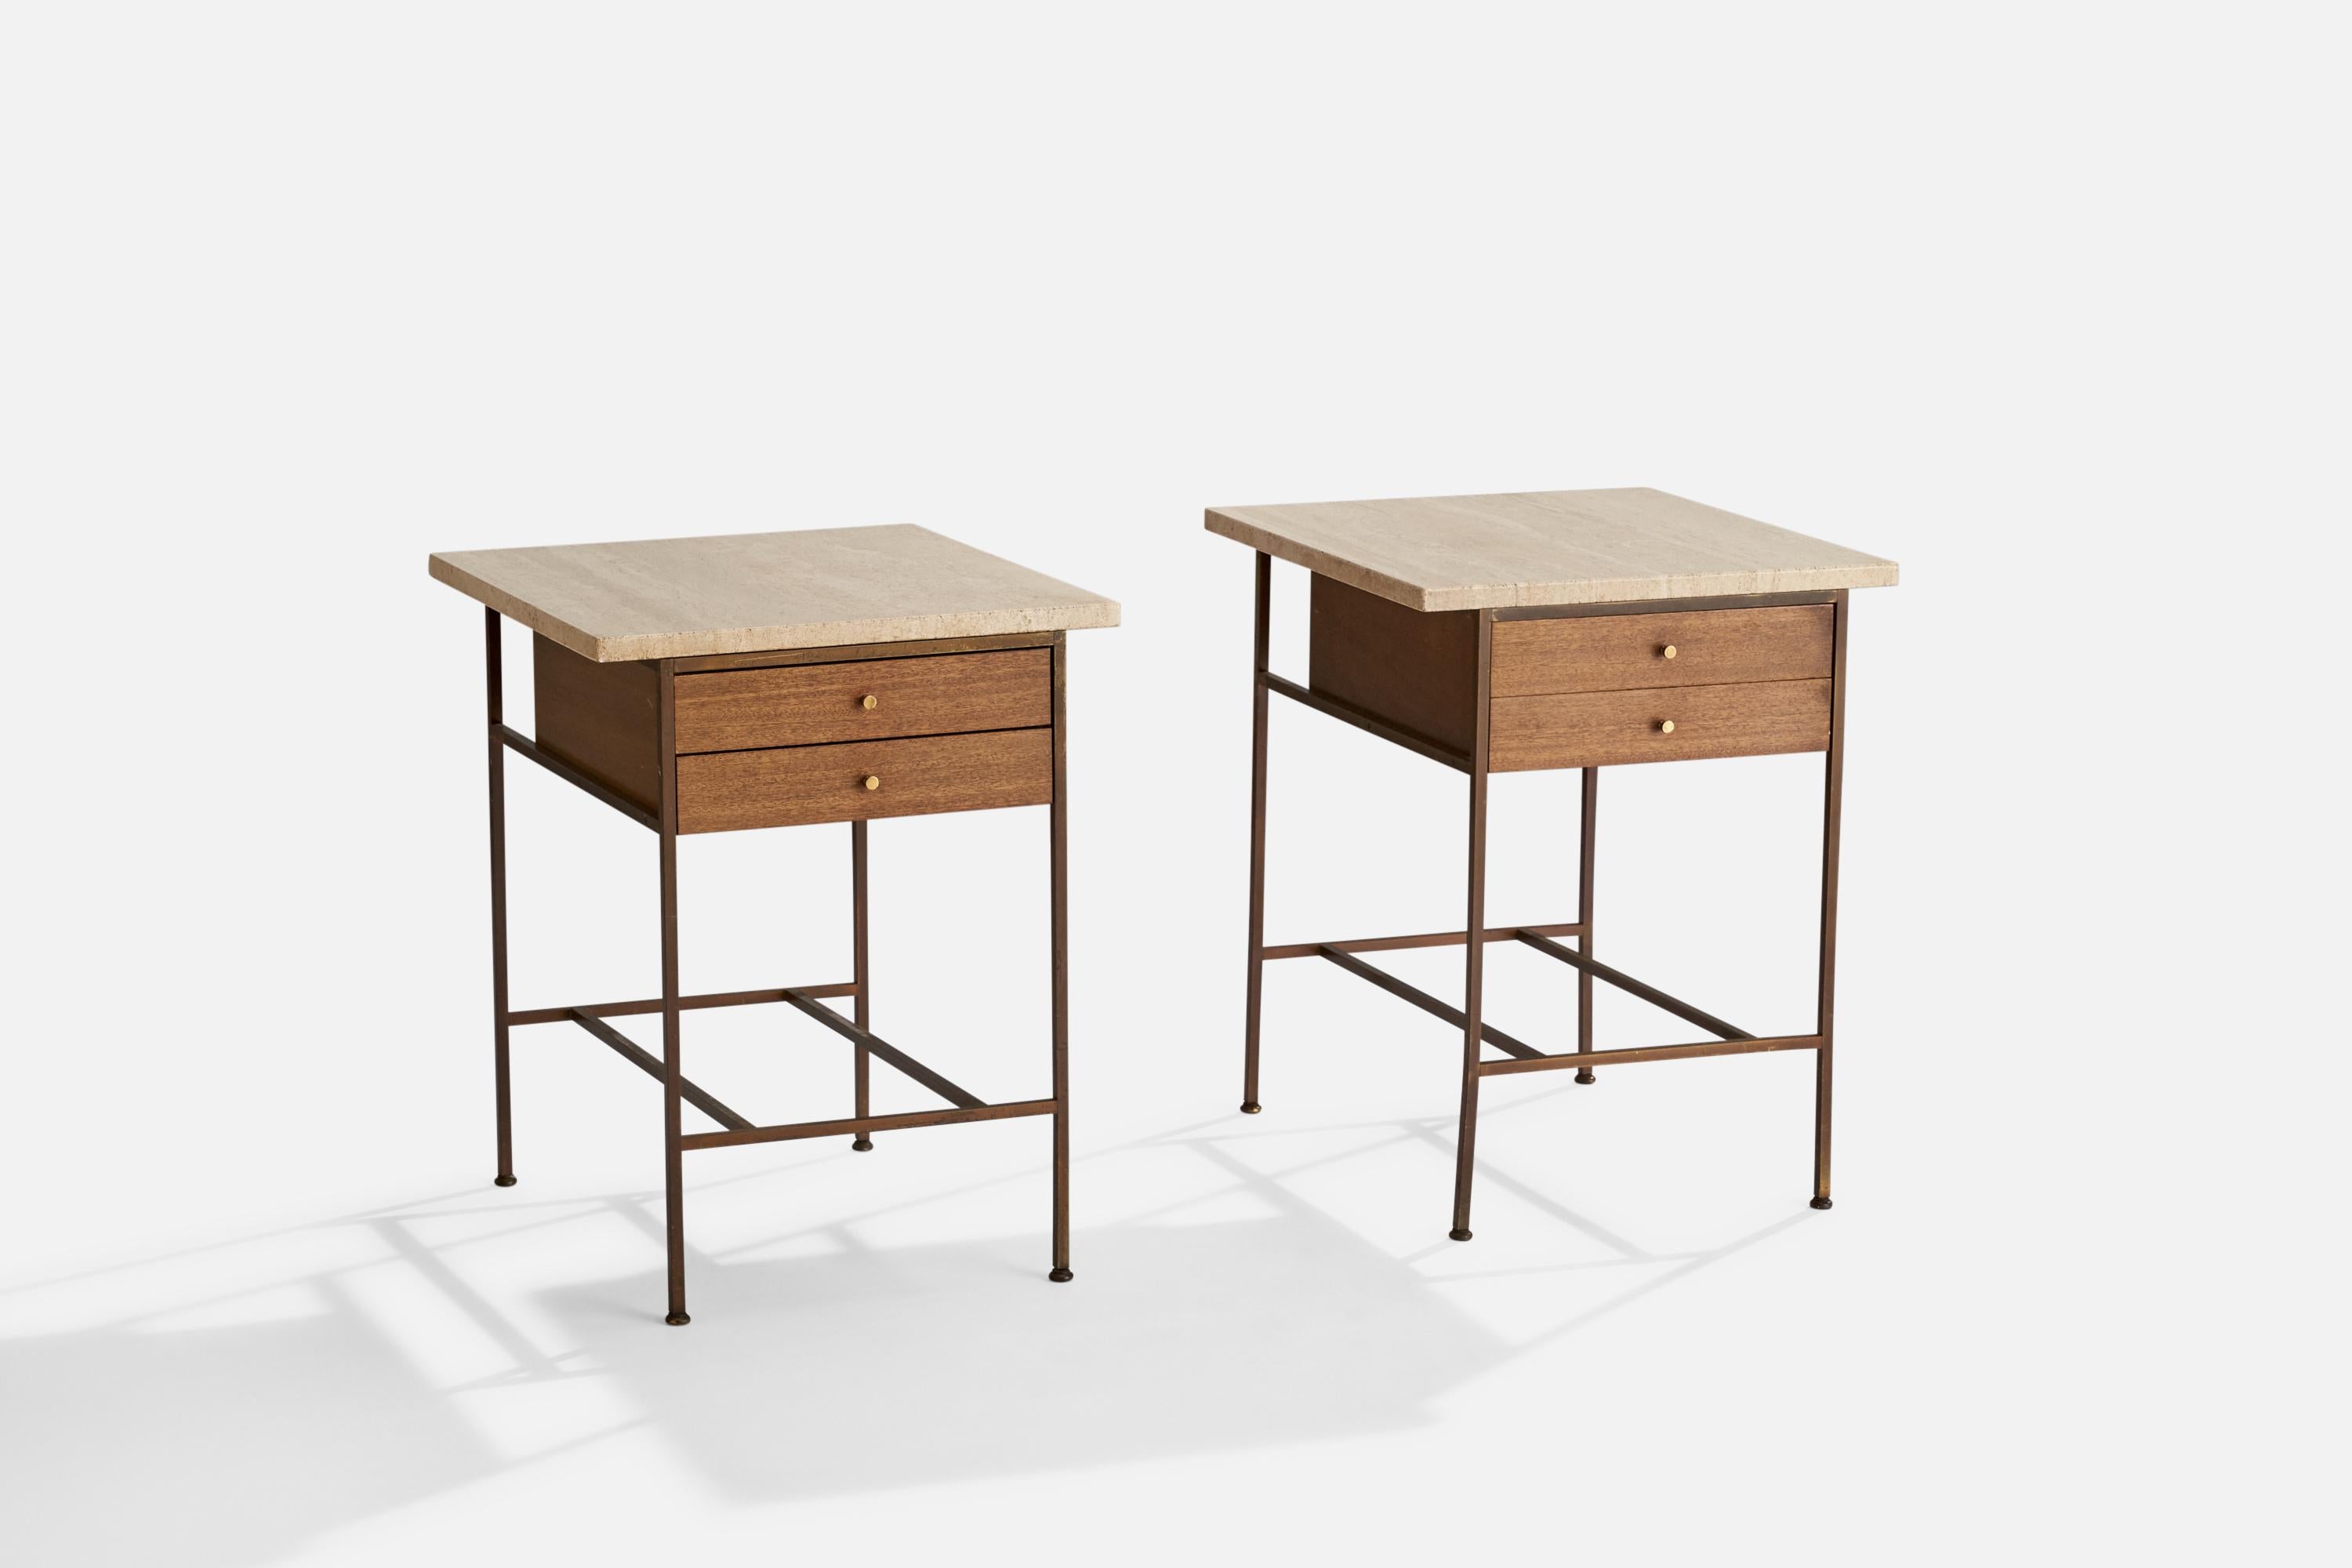 A pair of brass, walnut and travertine nightstands designed by Paul McCobb and produced by Calvin Furniture, USA, 1960s.